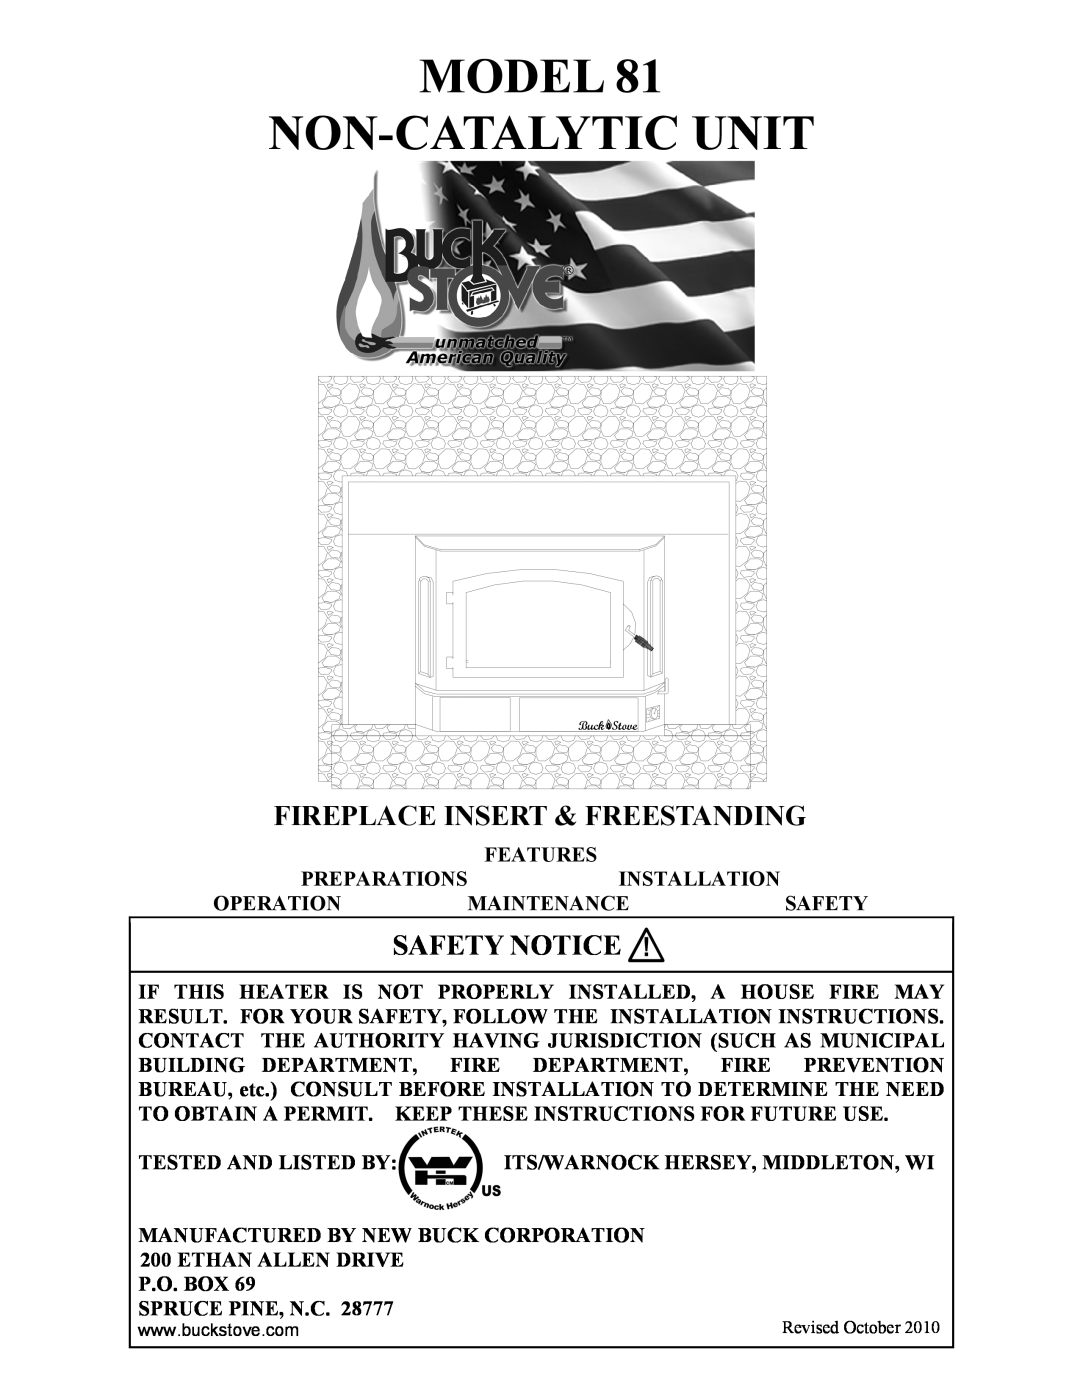 New Buck Corporation 81 installation instructions Fireplace Insert & Freestanding, Safety Notice, Model Non-Catalyticunit 